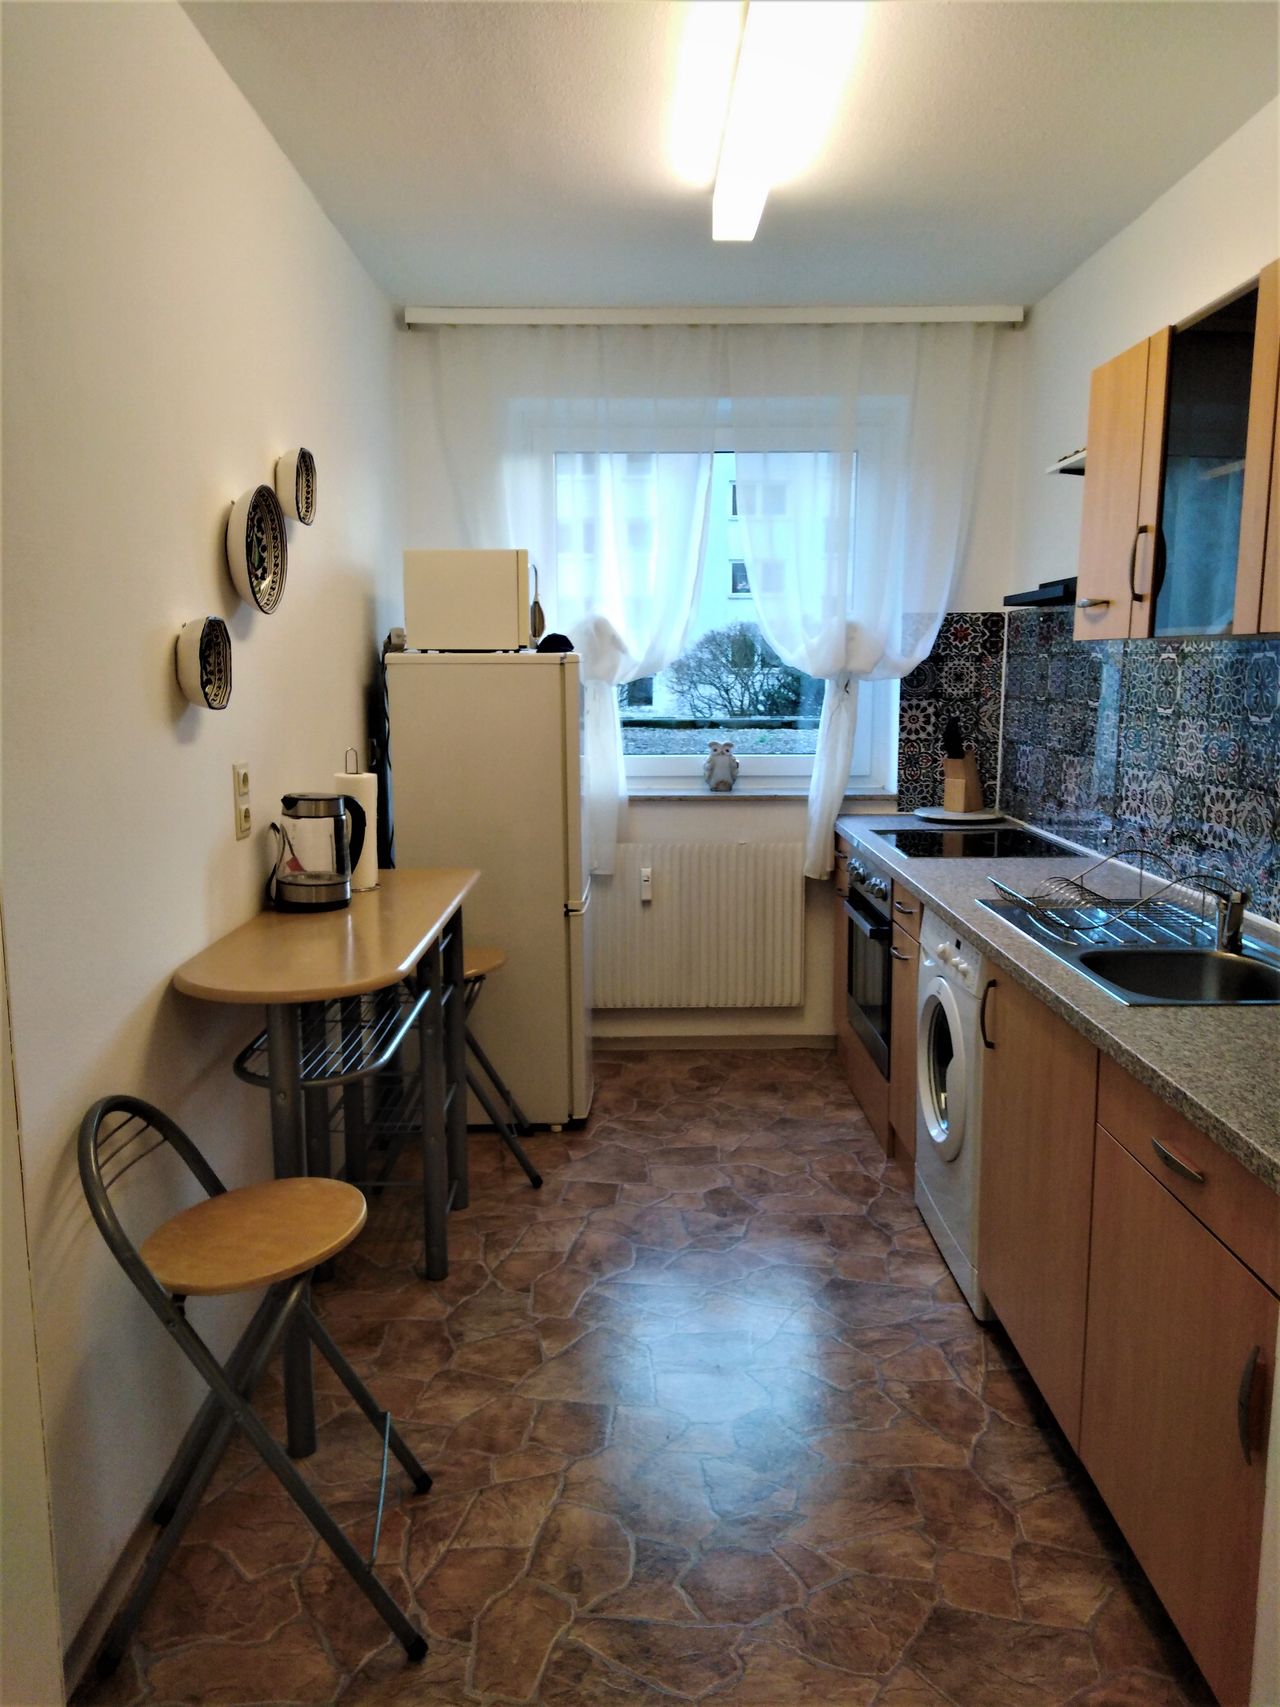 Fully furnished 2-room flat in Hanover near the city centre